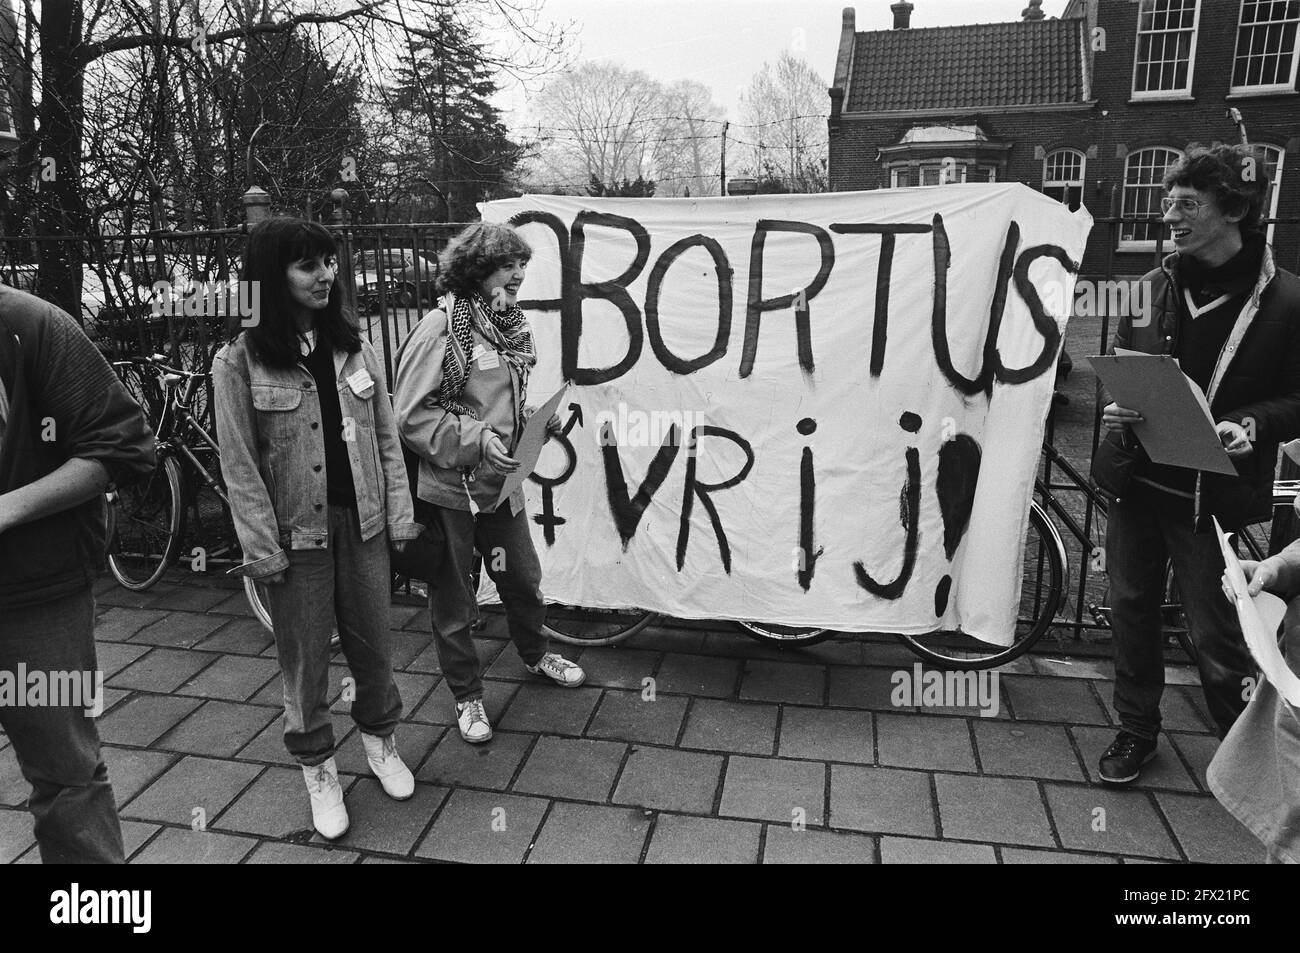 National women's strike day, on Amsterdam Mauritskade dem. schoolchildren and asked opinions passers-by, March 30, 1981, SCHOLIERES, strikes, The Netherlands, 20th century press agency photo, news to remember, documentary, historic photography 1945-1990, visual stories, human history of the Twentieth Century, capturing moments in time Stock Photo